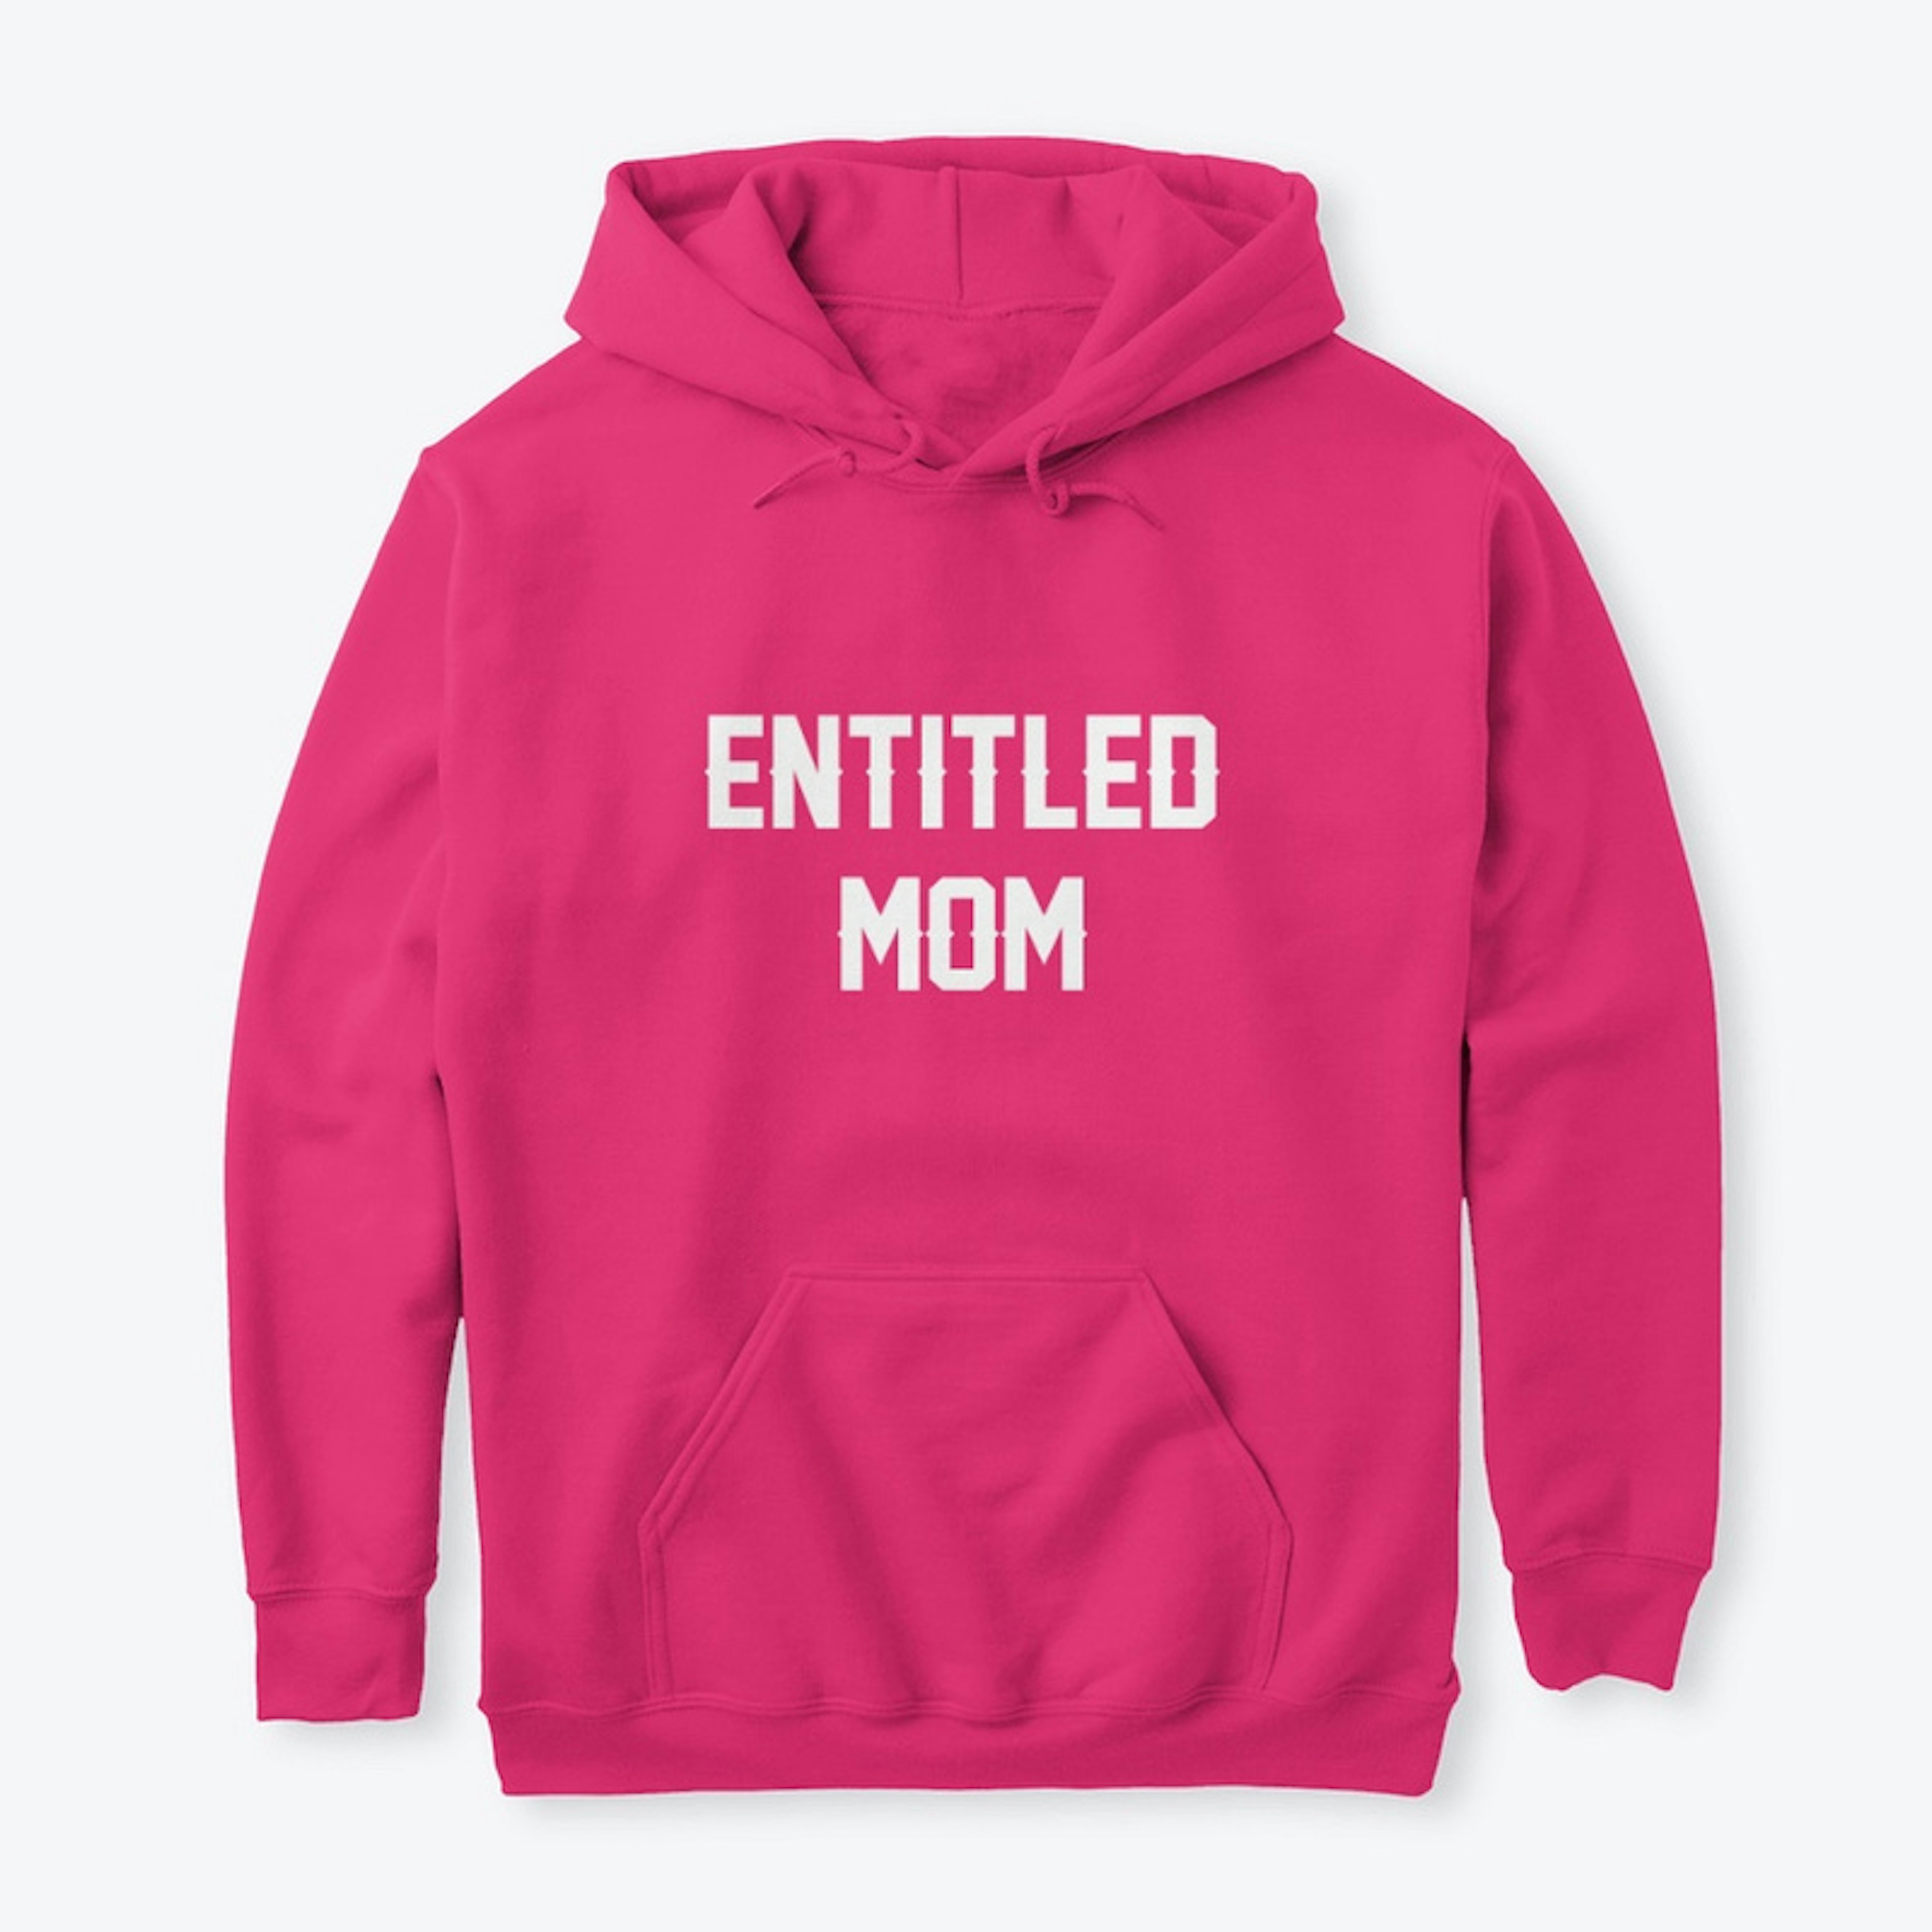 Entitled Mom Products